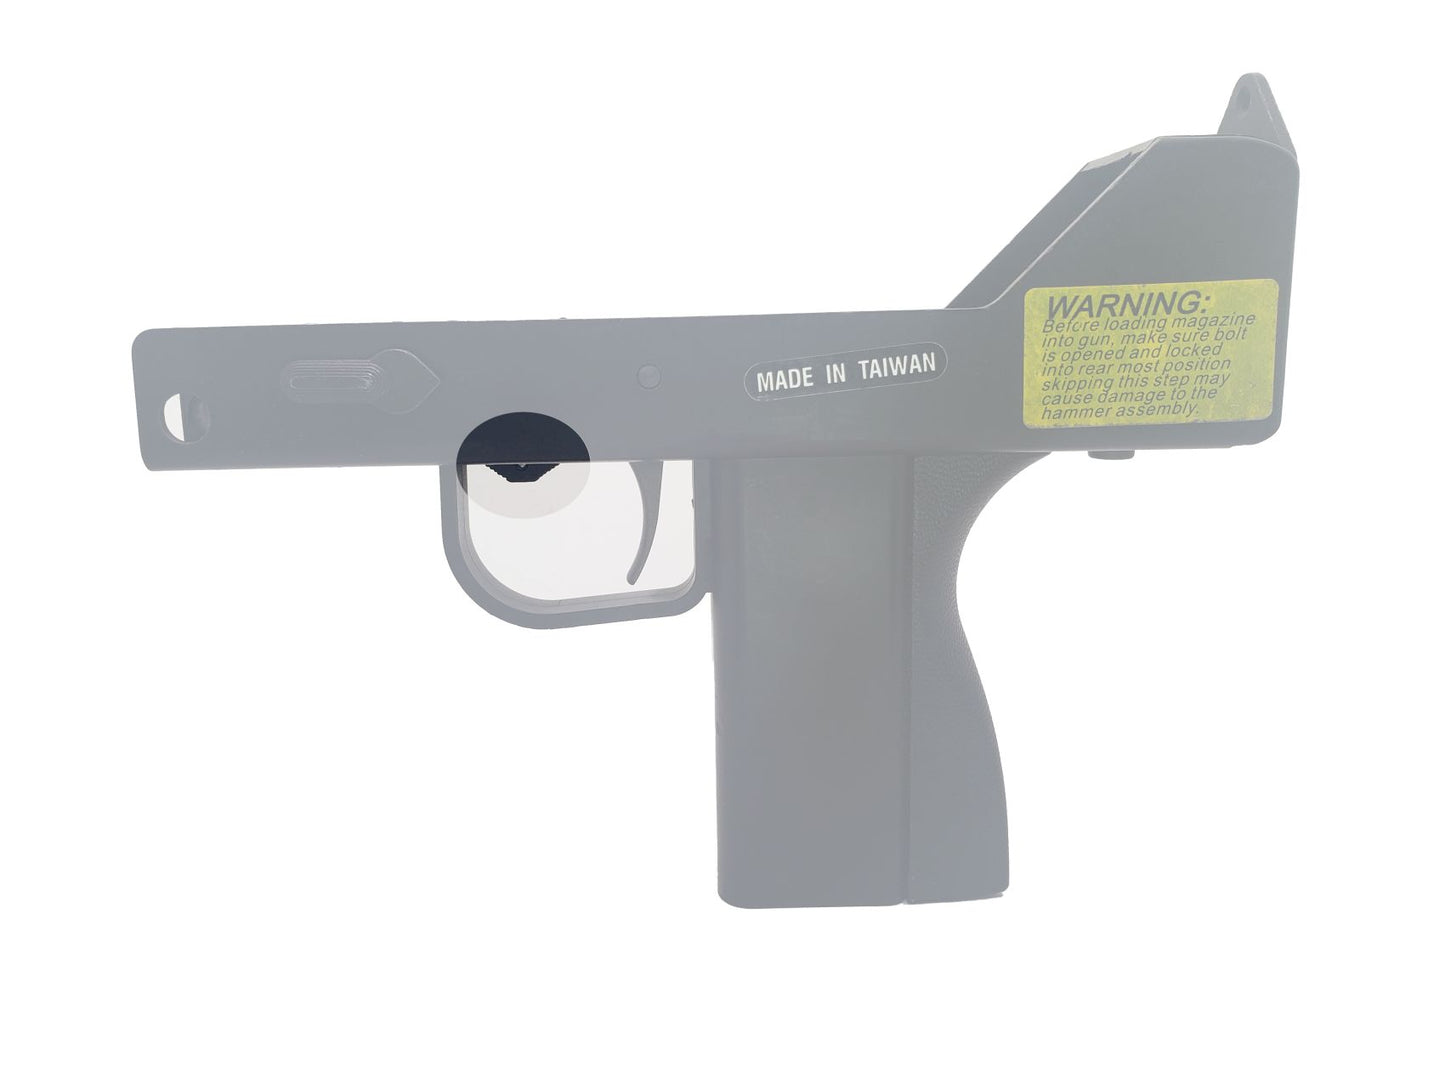 KWA M11A1 / MAC 11 Safety Lever Cover